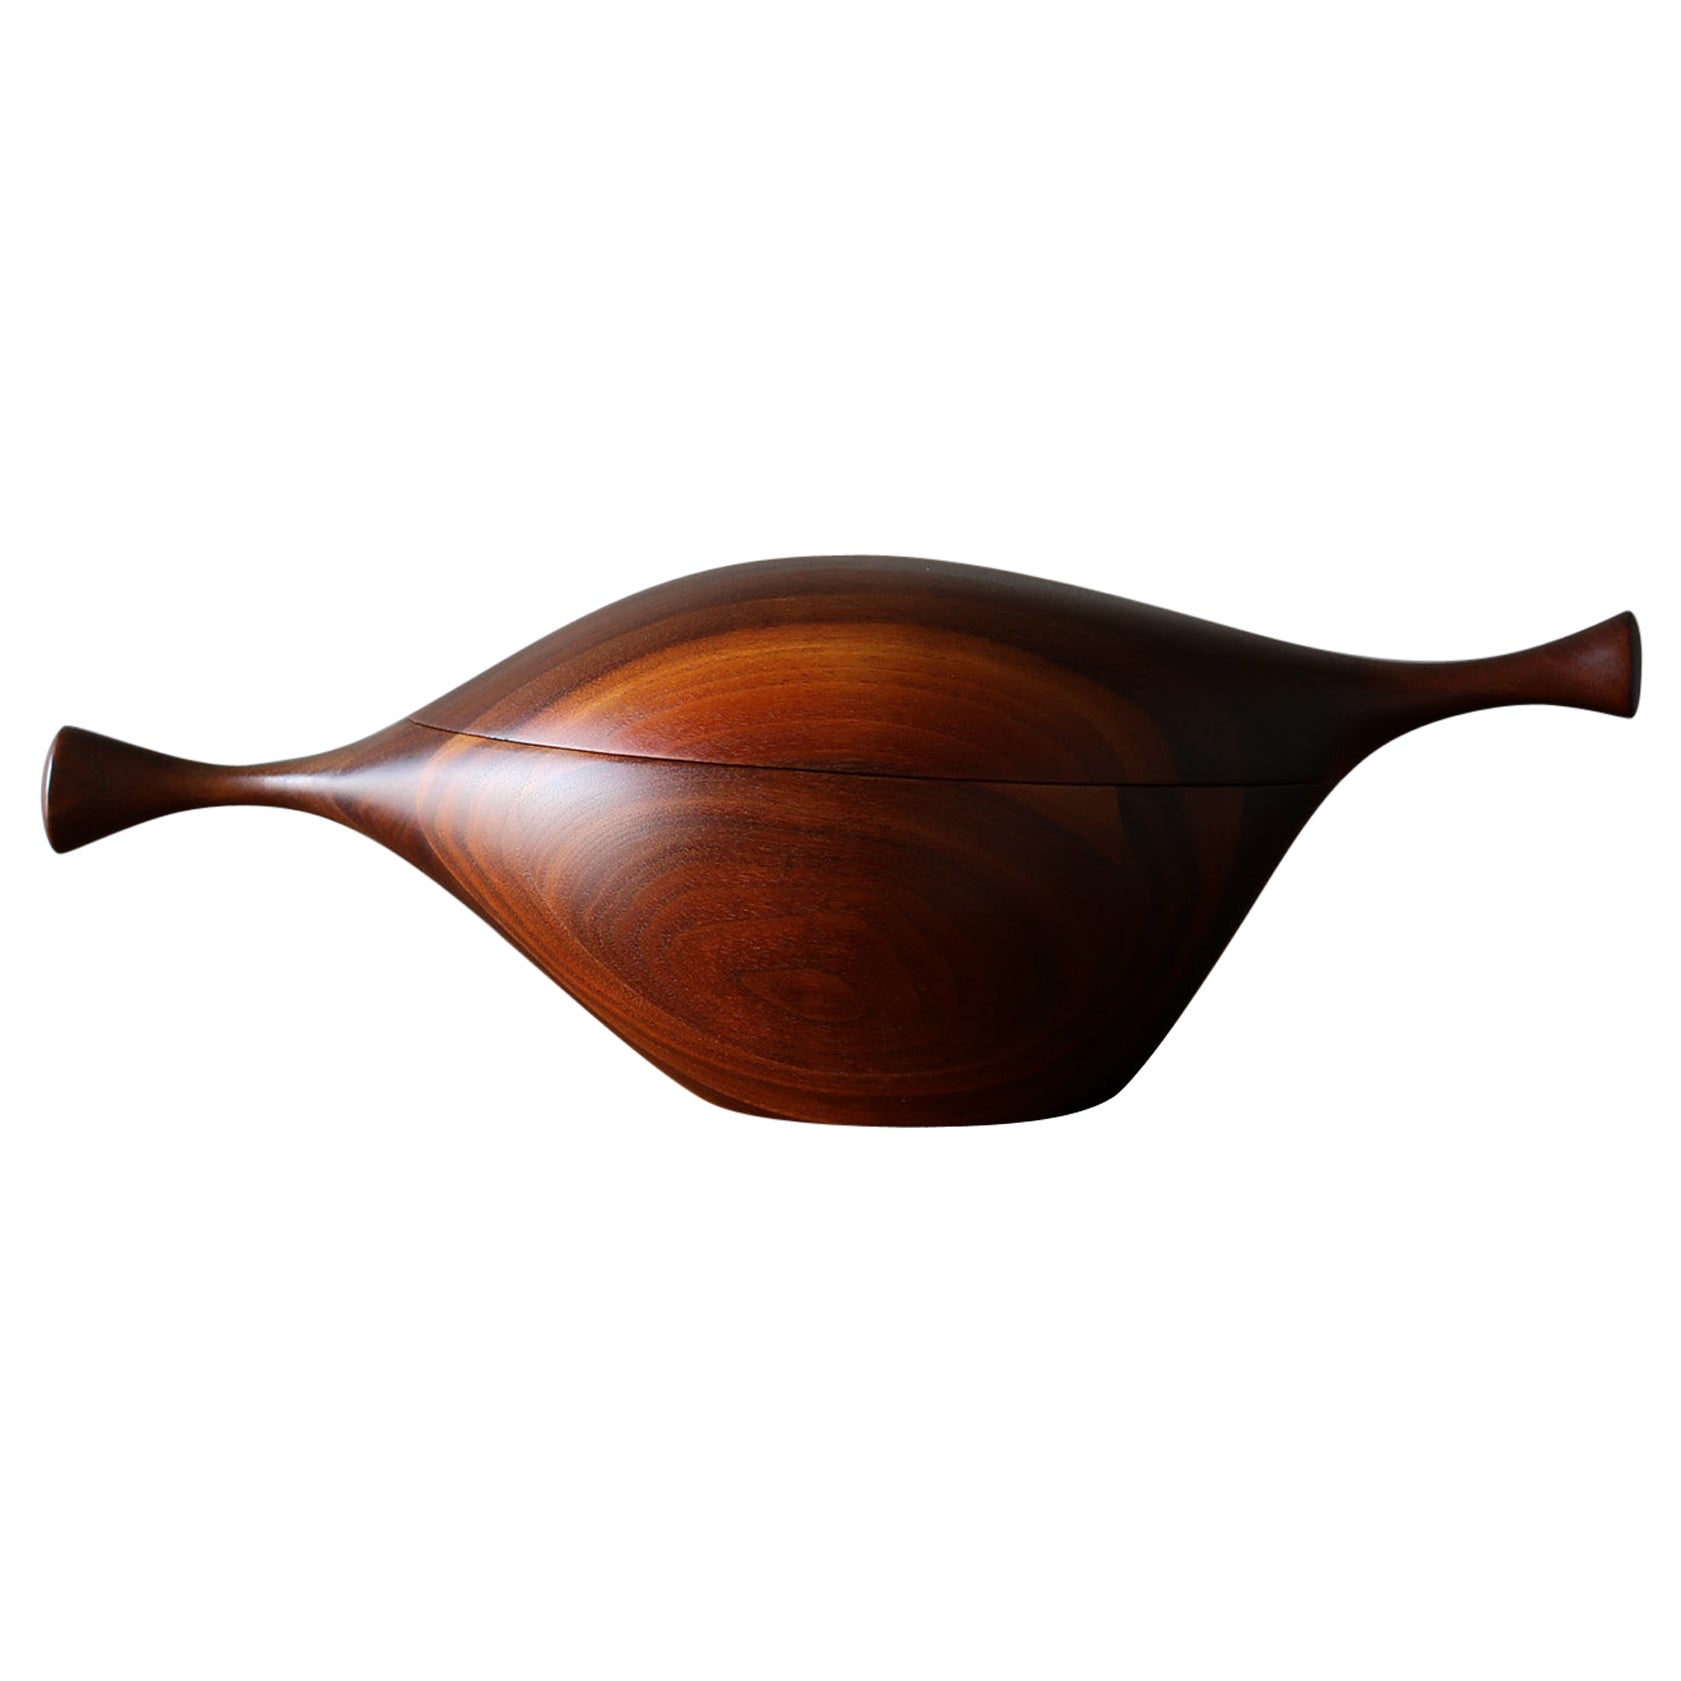 Daniel Loomis Valenza Handcrafted Walnut Covered Bowl,  c.1960 For Sale